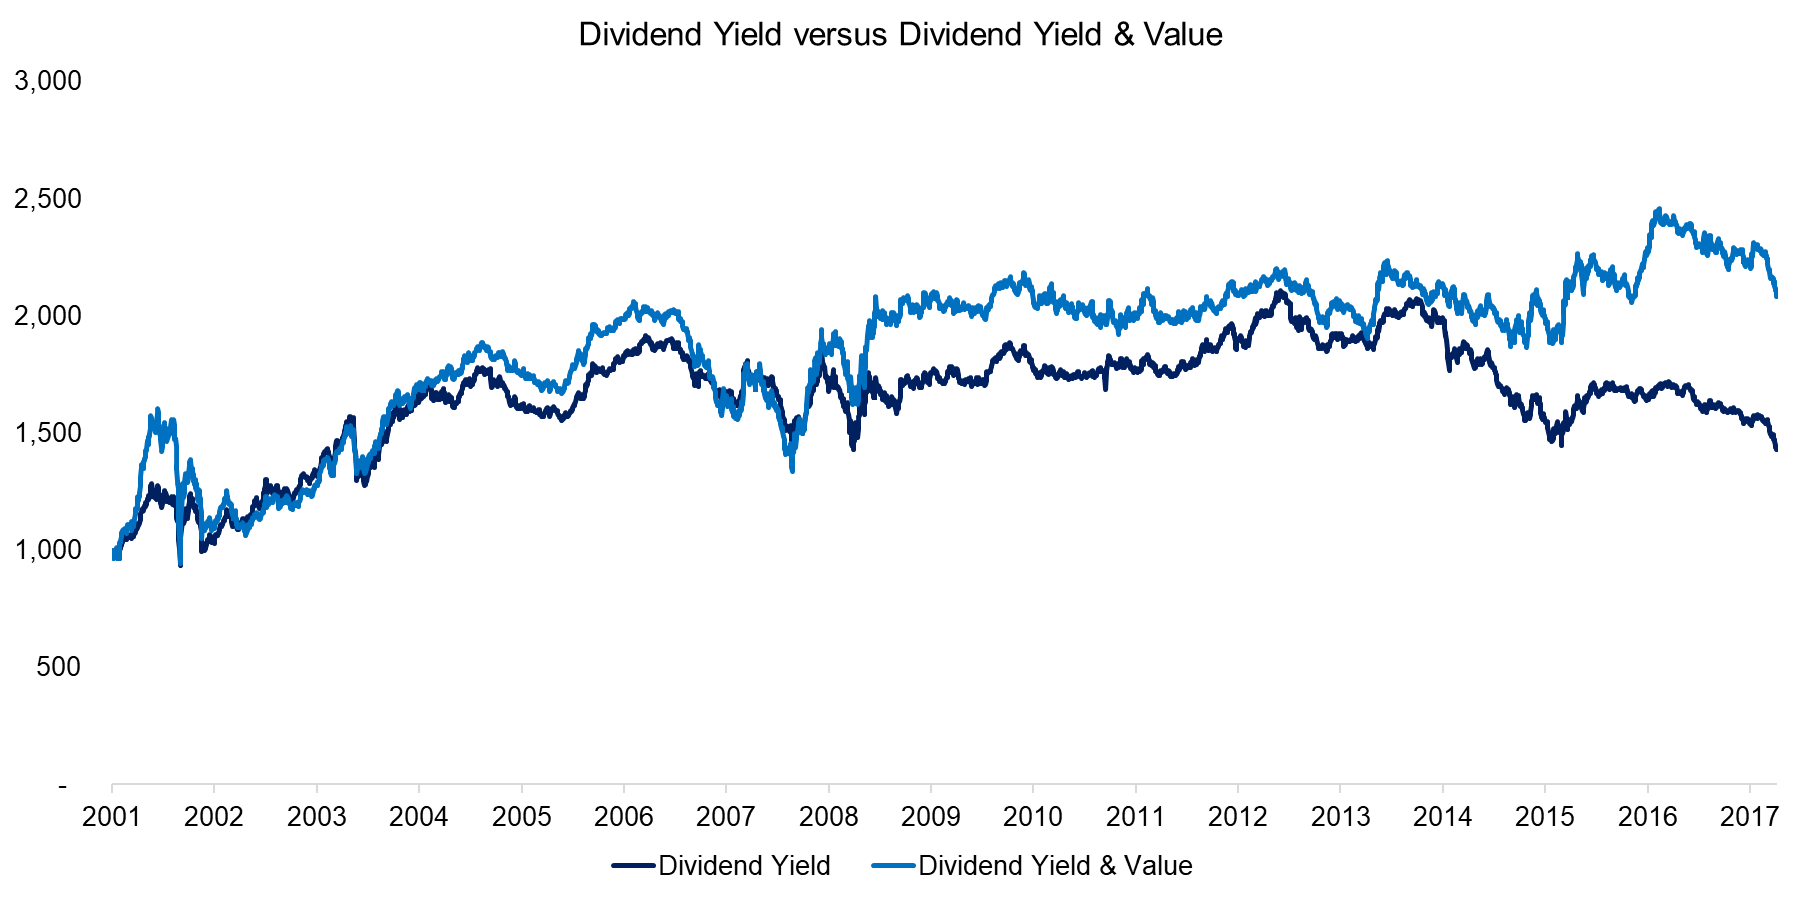 Dividend Yield versus Dividend Yield & Value